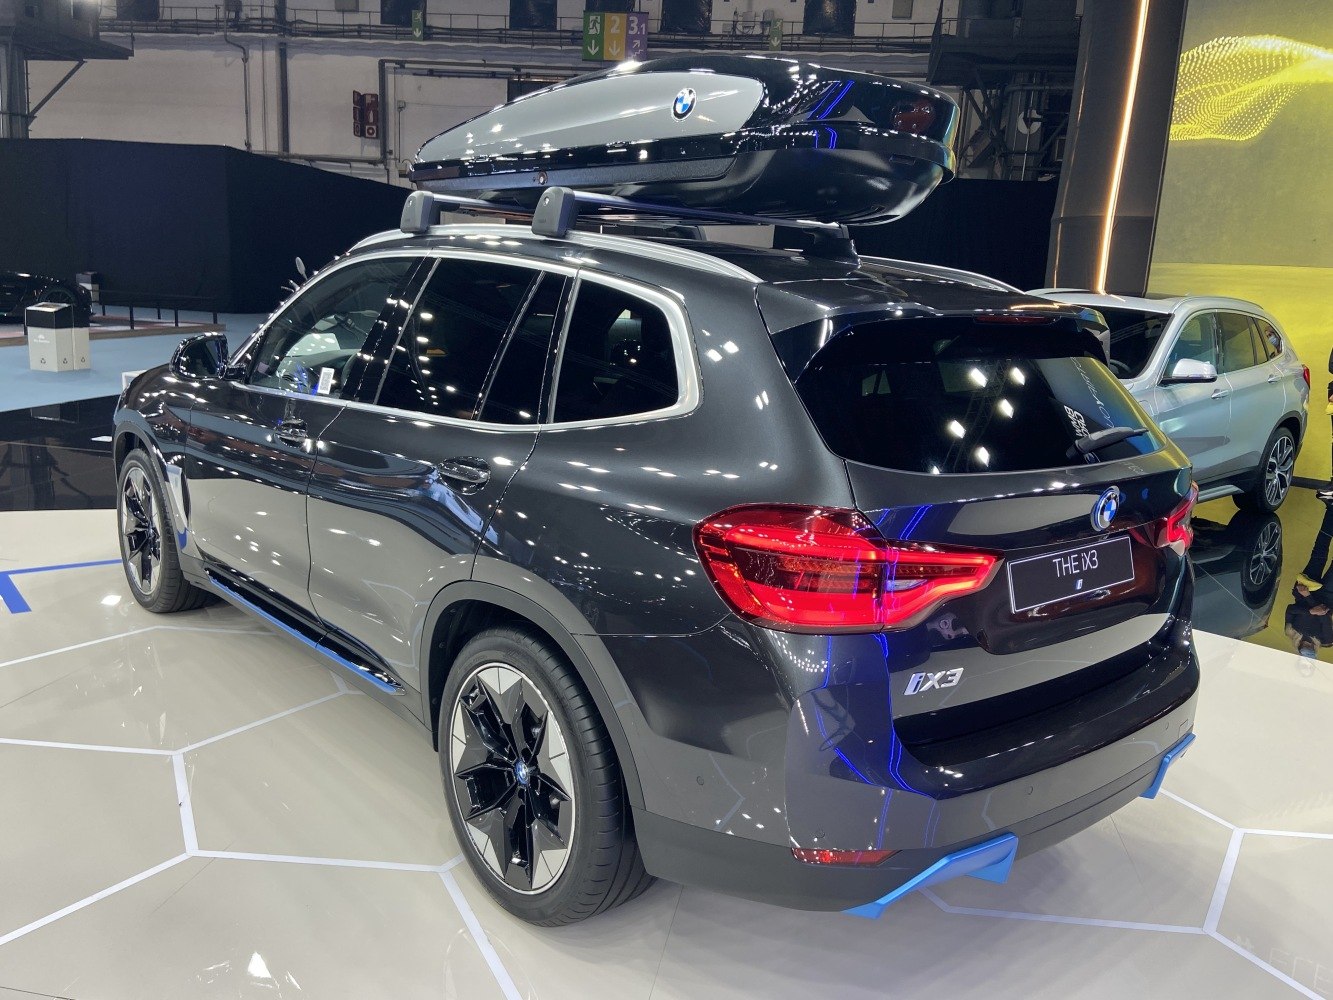 https://totalrenting.es/wp-content/uploads/2022/10/bmw-ix3-g08-2021-80-kwh-286-cv-suv-2.png